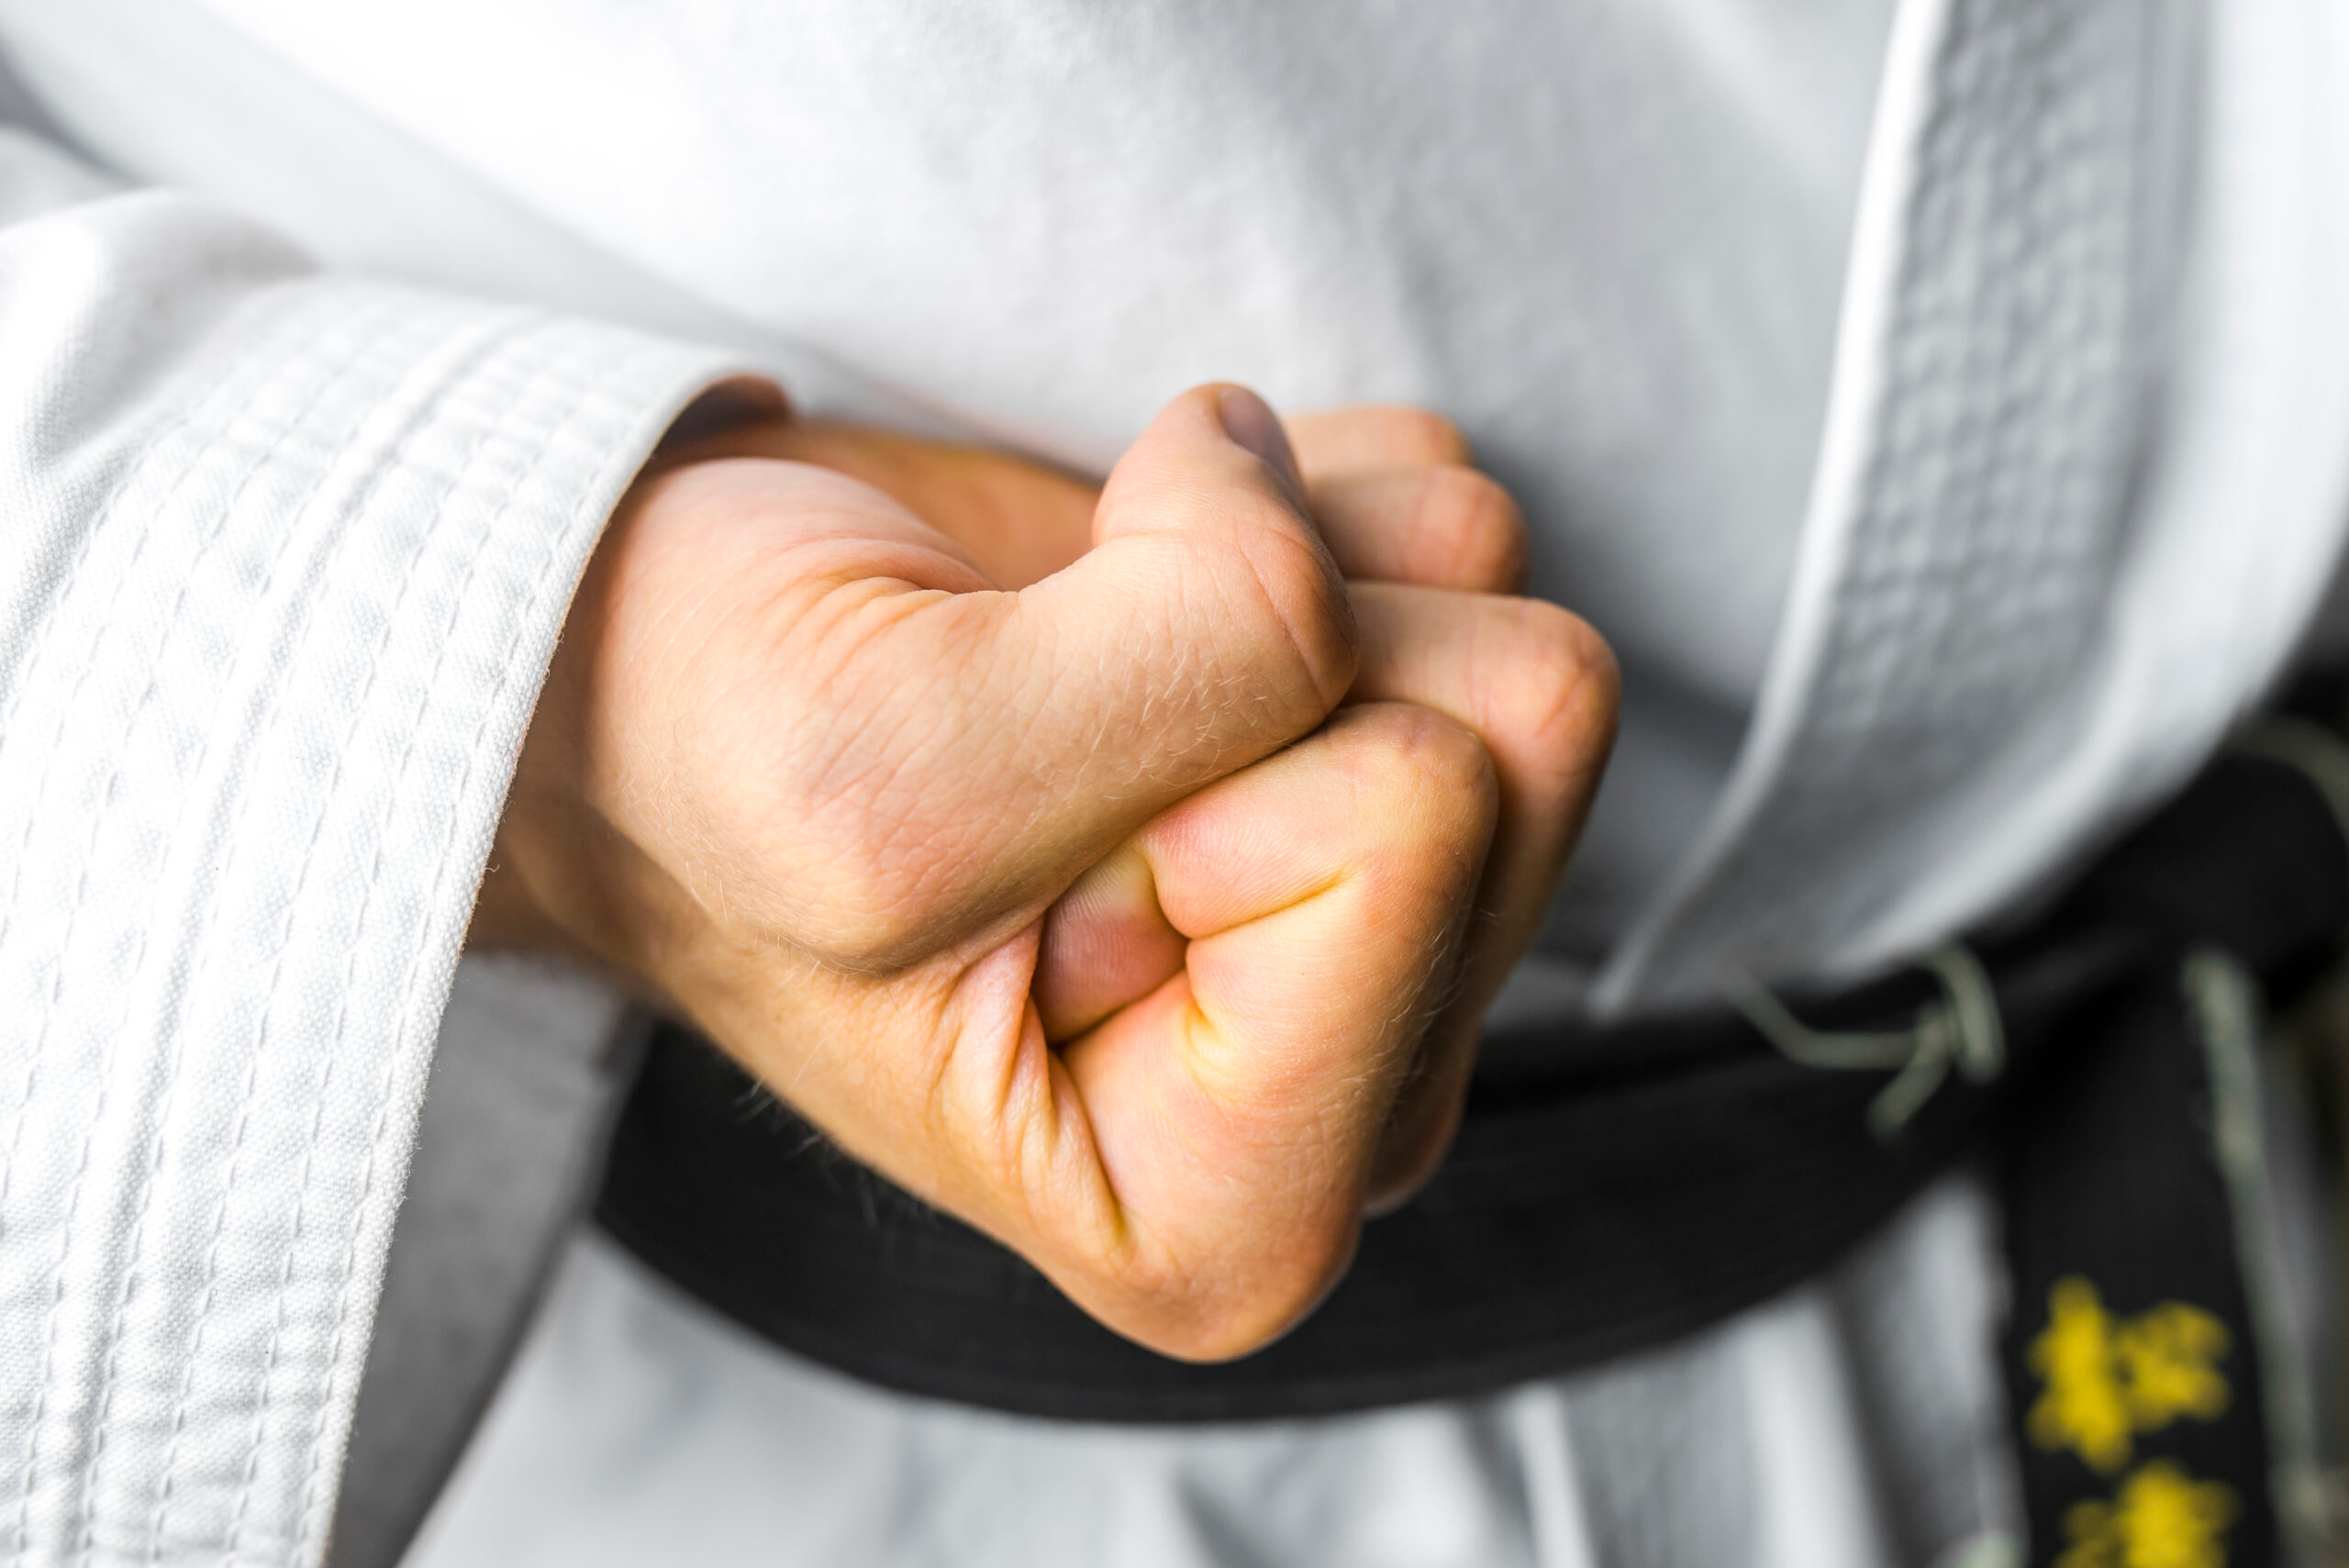 martial artist holding fist tight ready for karate punch - learn kung fu online